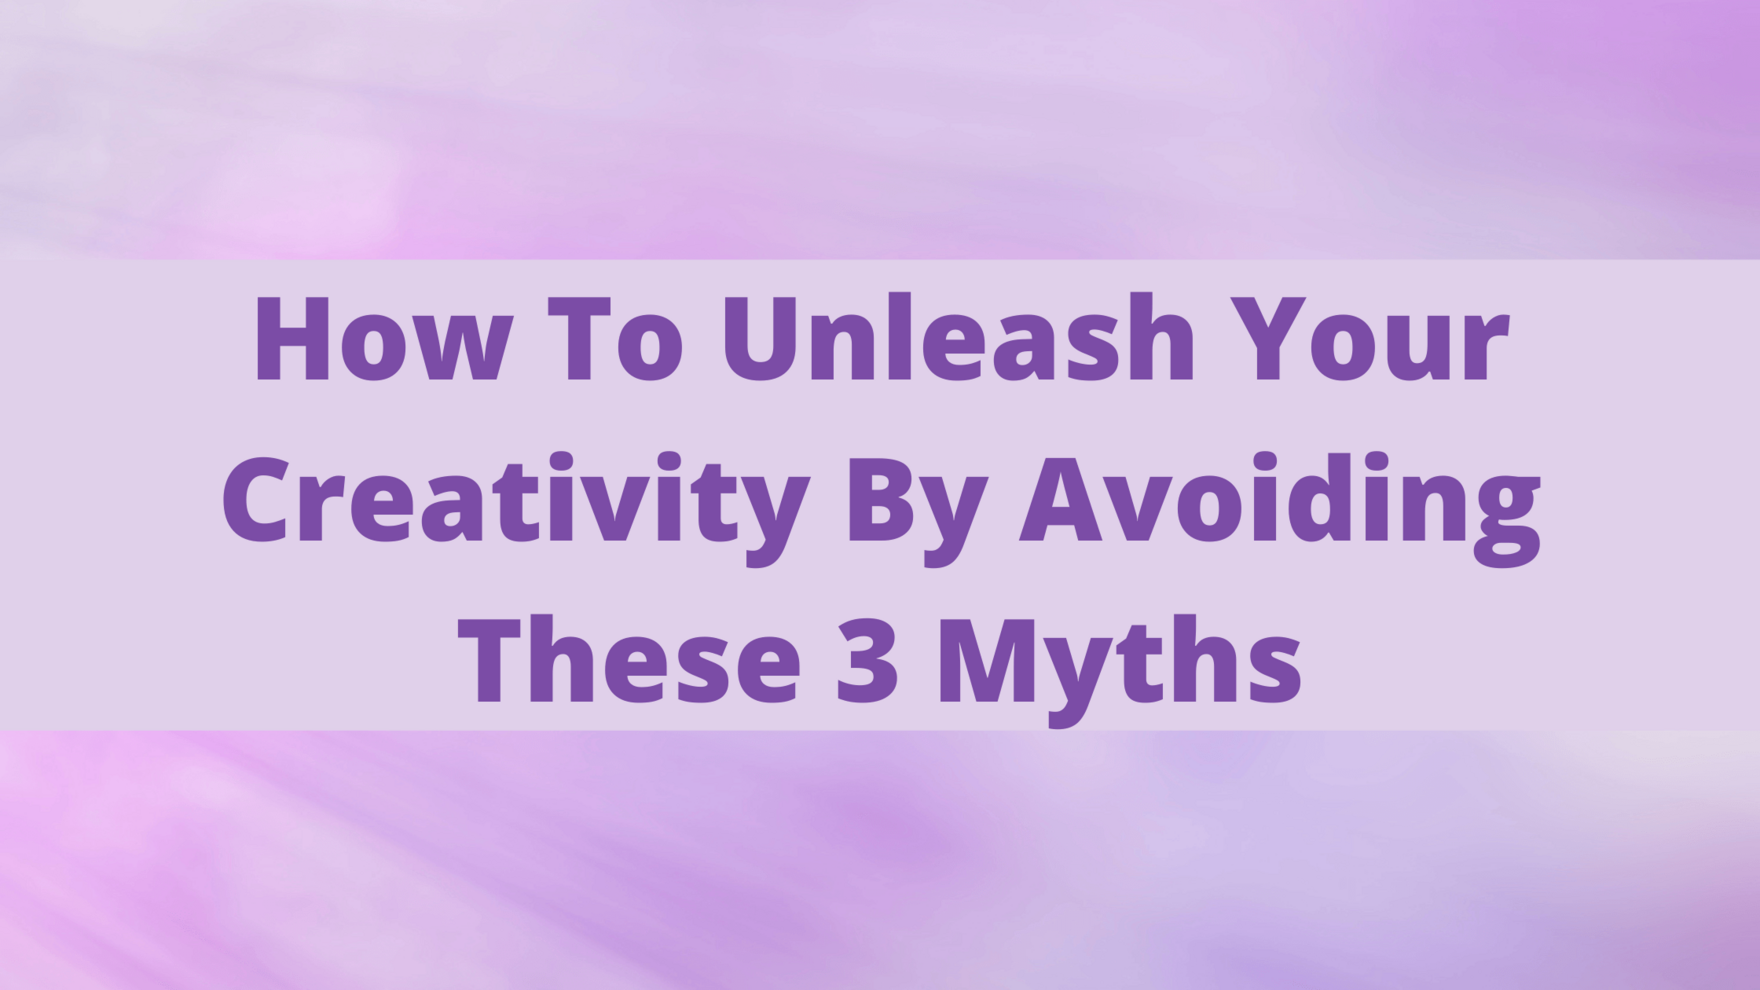 Business Mindset Blog - How To Unleash Your Creativity By Avoiding These 3 Myths